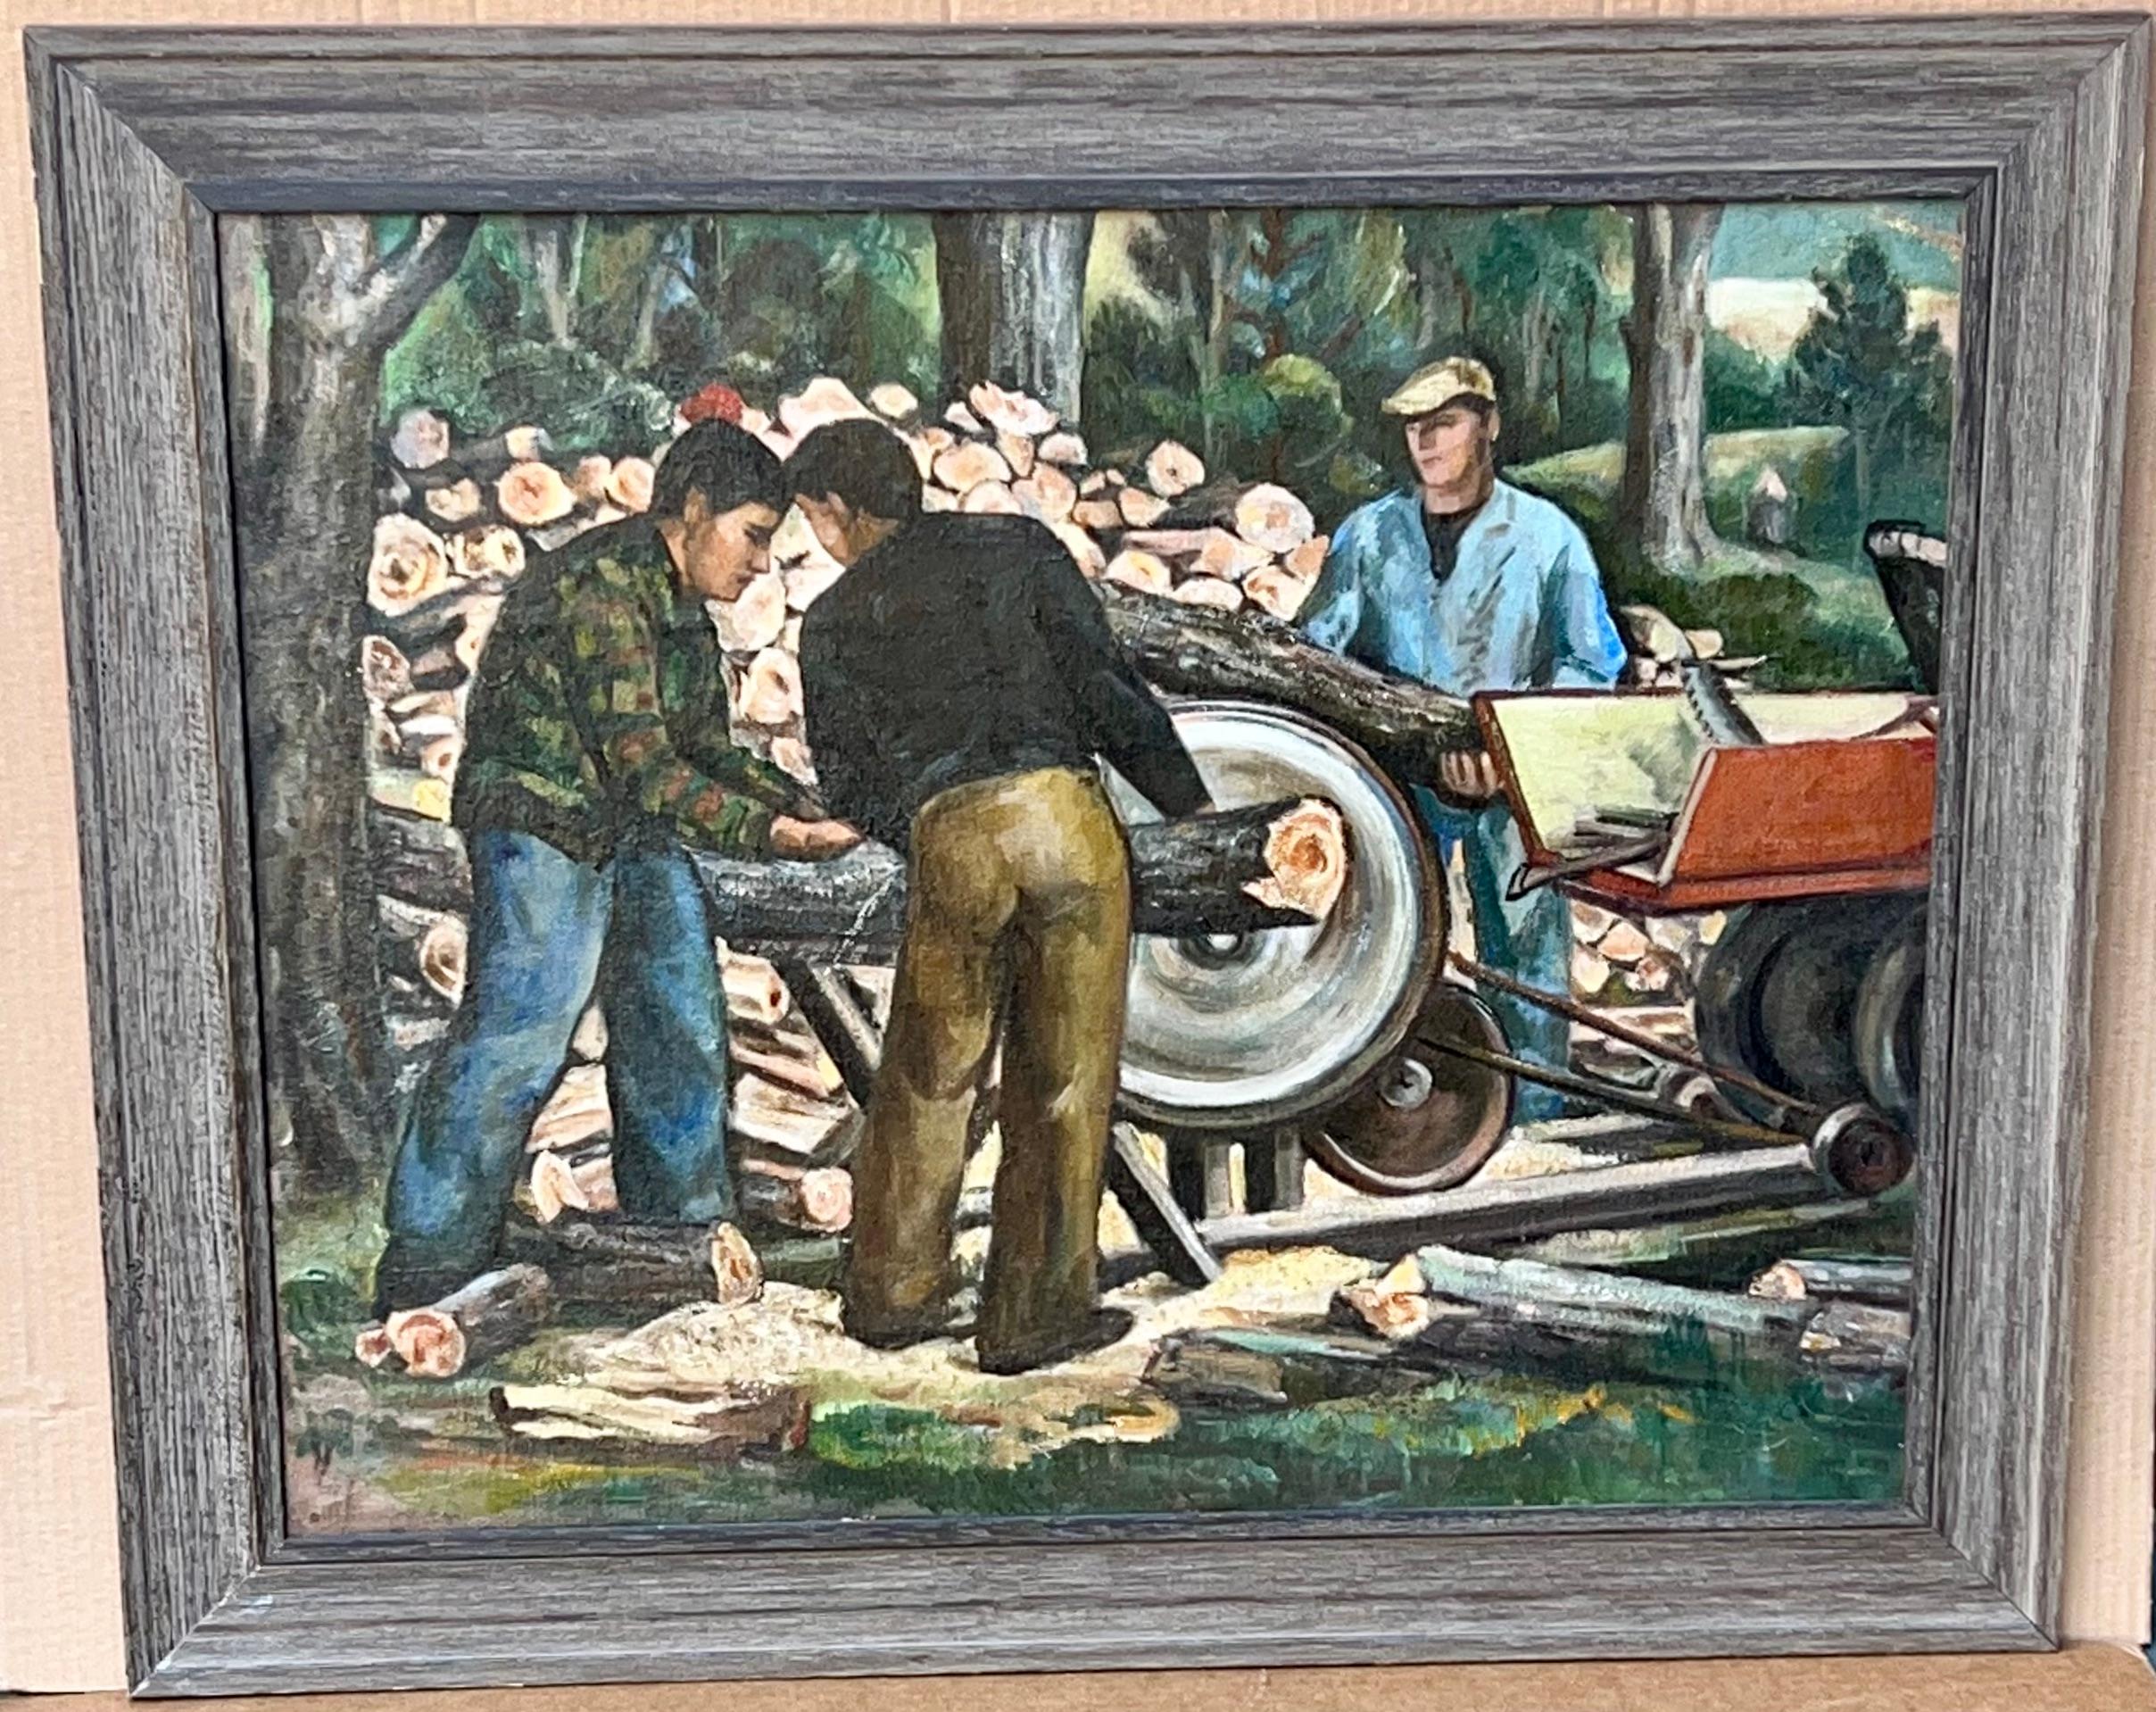 Loggers WPA Depression Era Modern Mid 20th Century American Scene Social Realism - Painting by William L'Engle